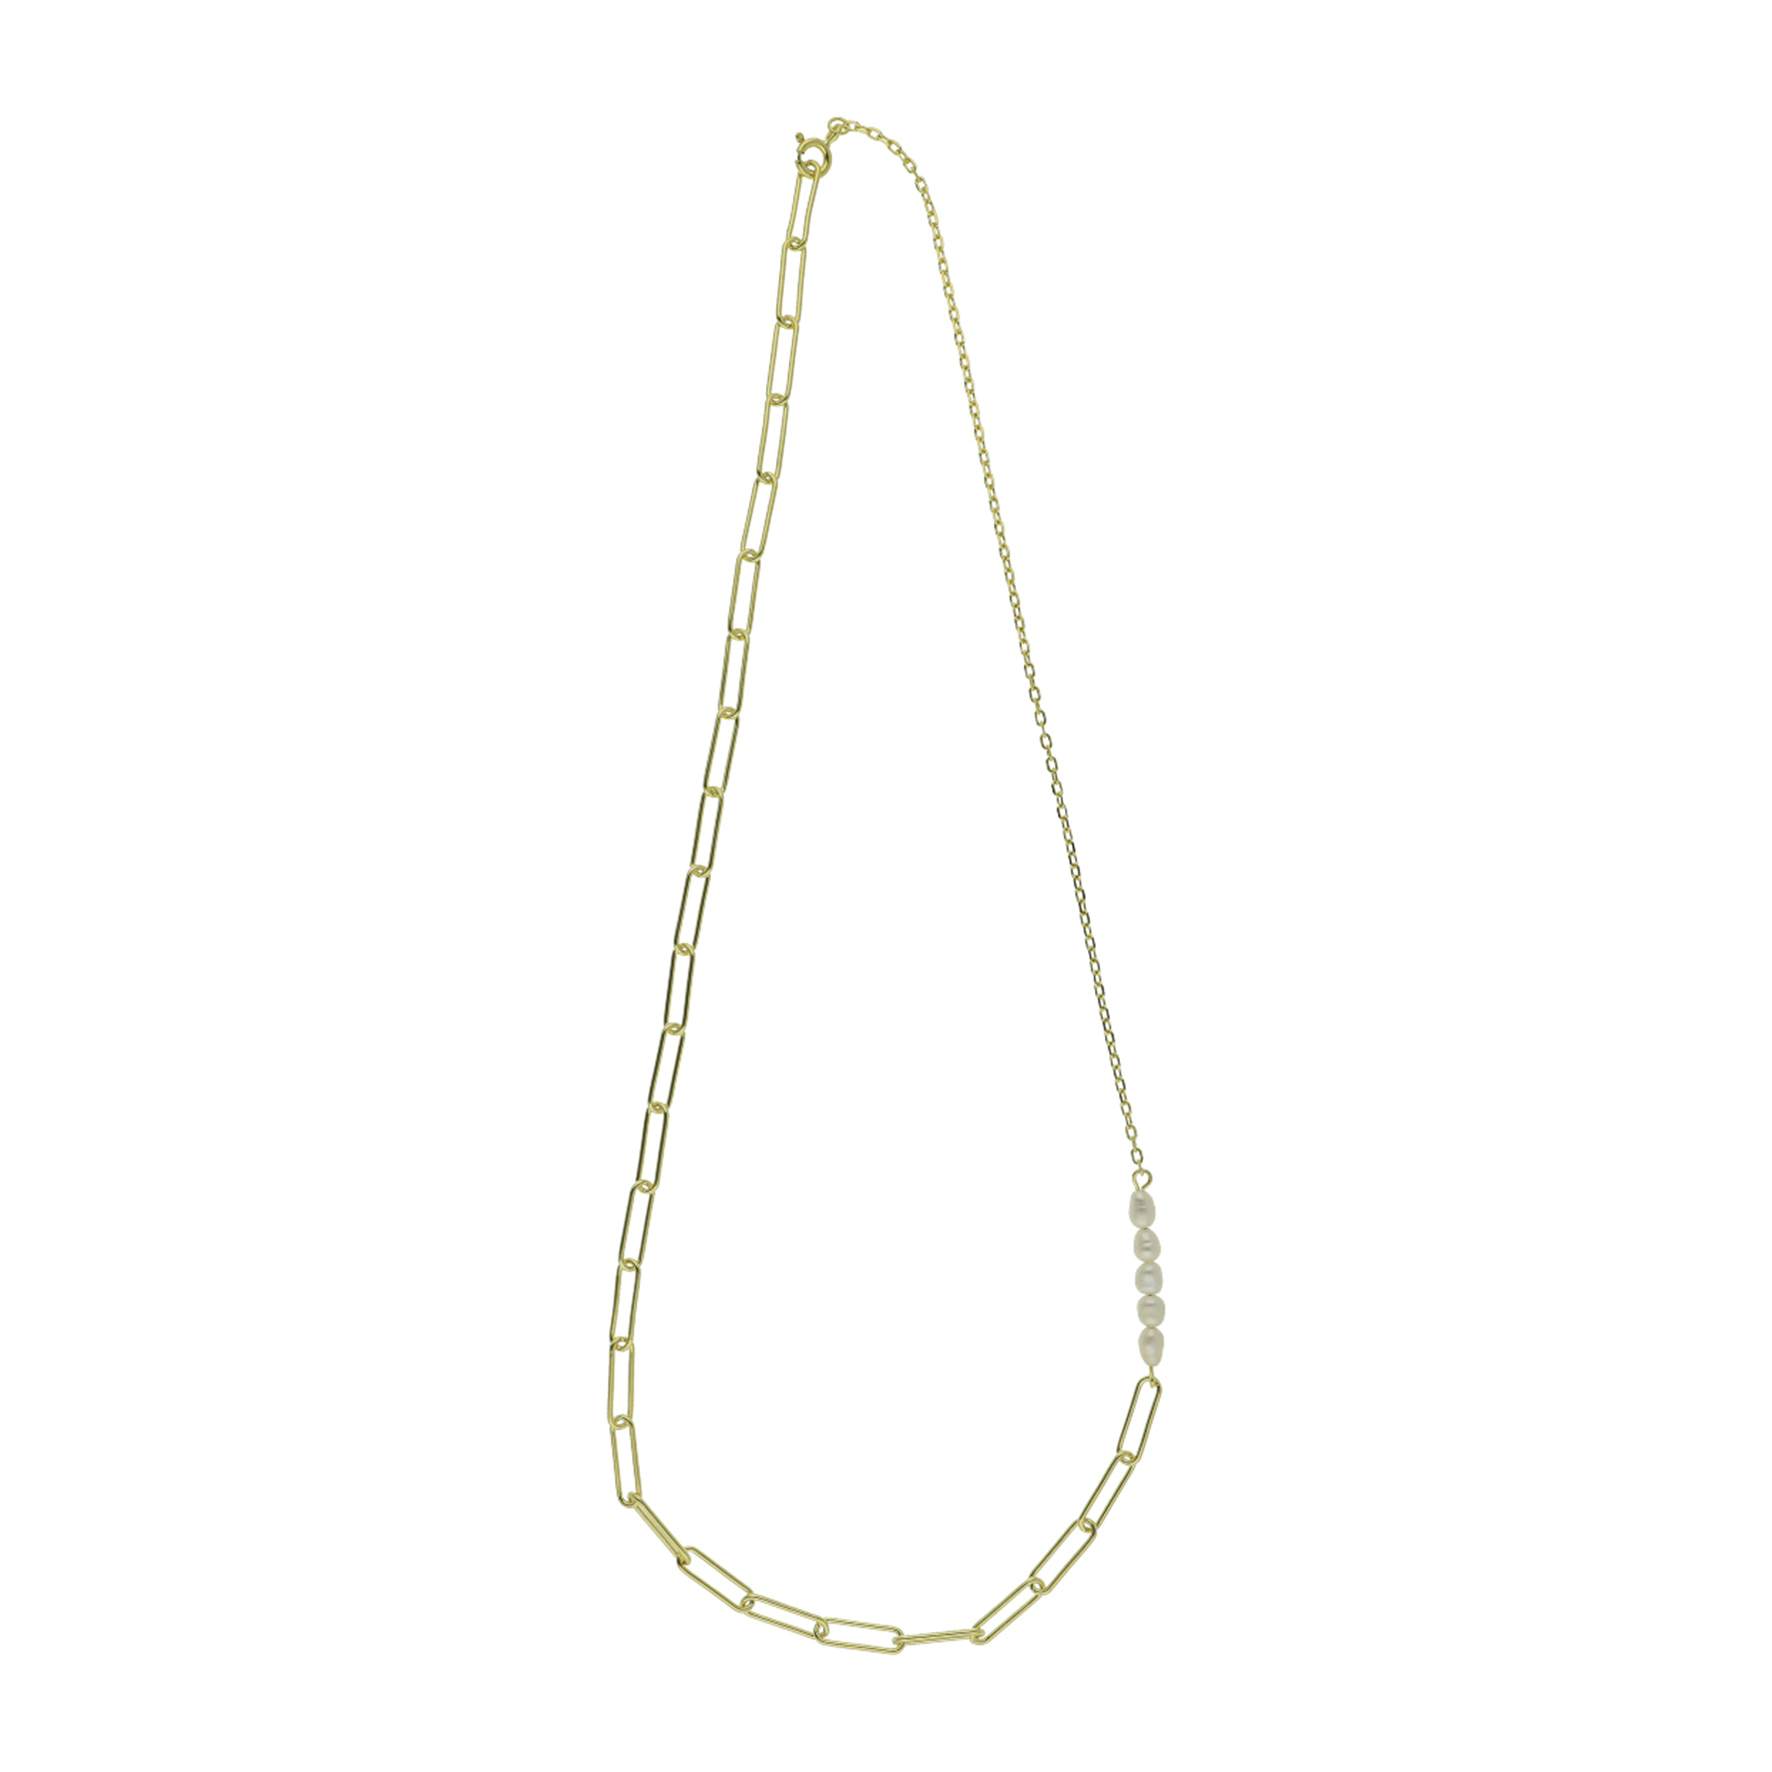 Dicte Pearl Necklace from Nuni Copenhagen in Goldplated-Silver Sterling 925|Freshwater Pearl|Blank